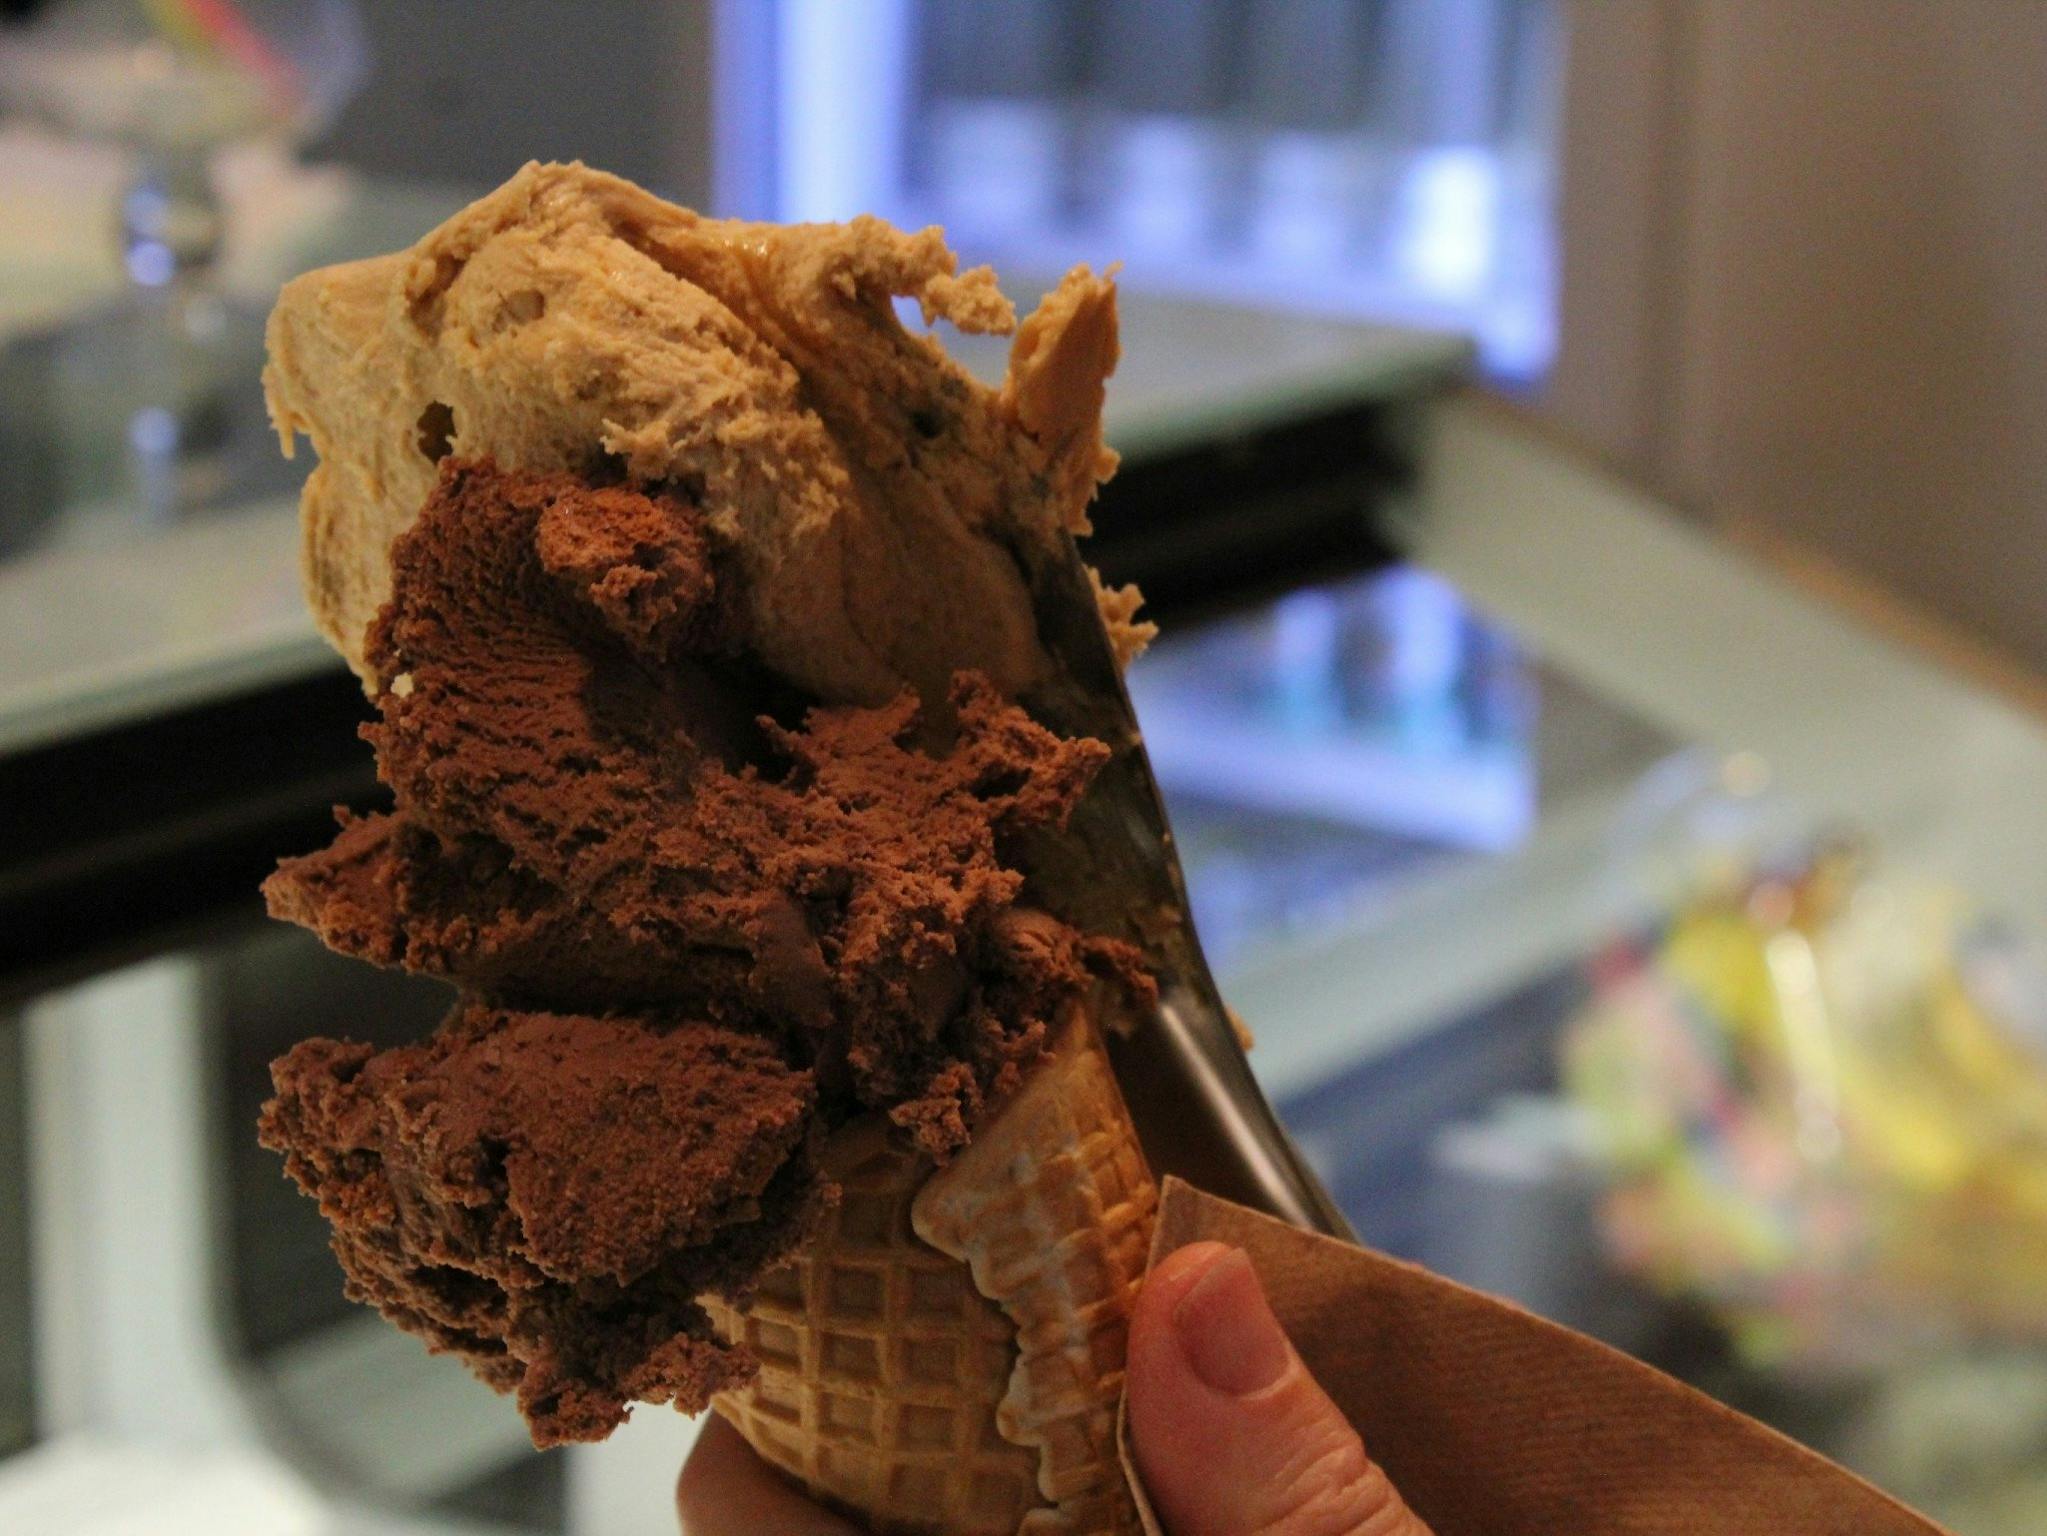 Two scoop gelatina in a waffle cone